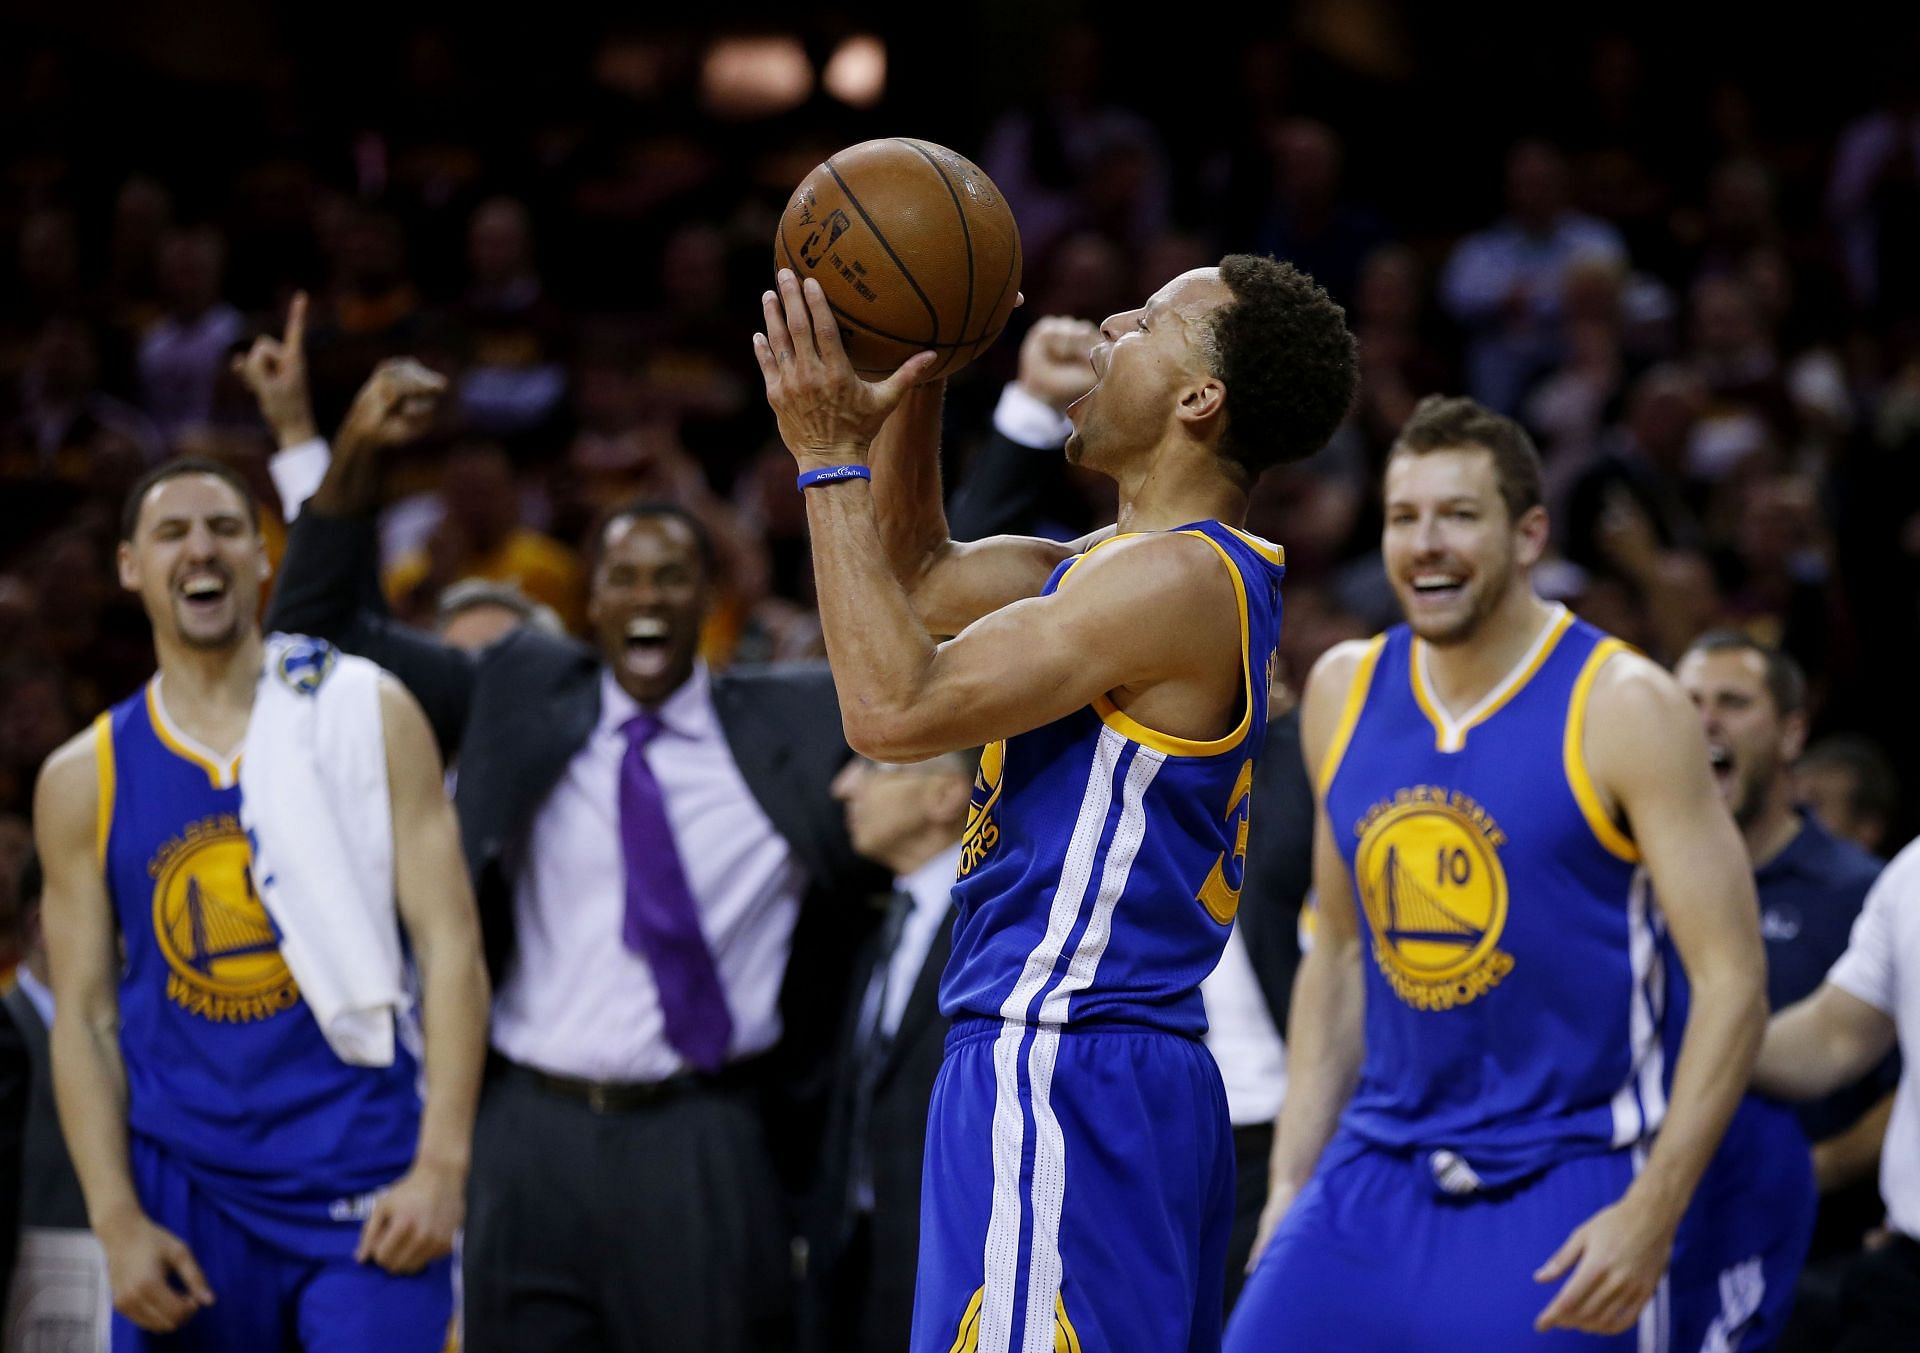 Stephen Curry #30 and the Golden State Warriors celebrate beating the Cleveland Cavaliers in Game 6 of the 2015 NBA Finals.